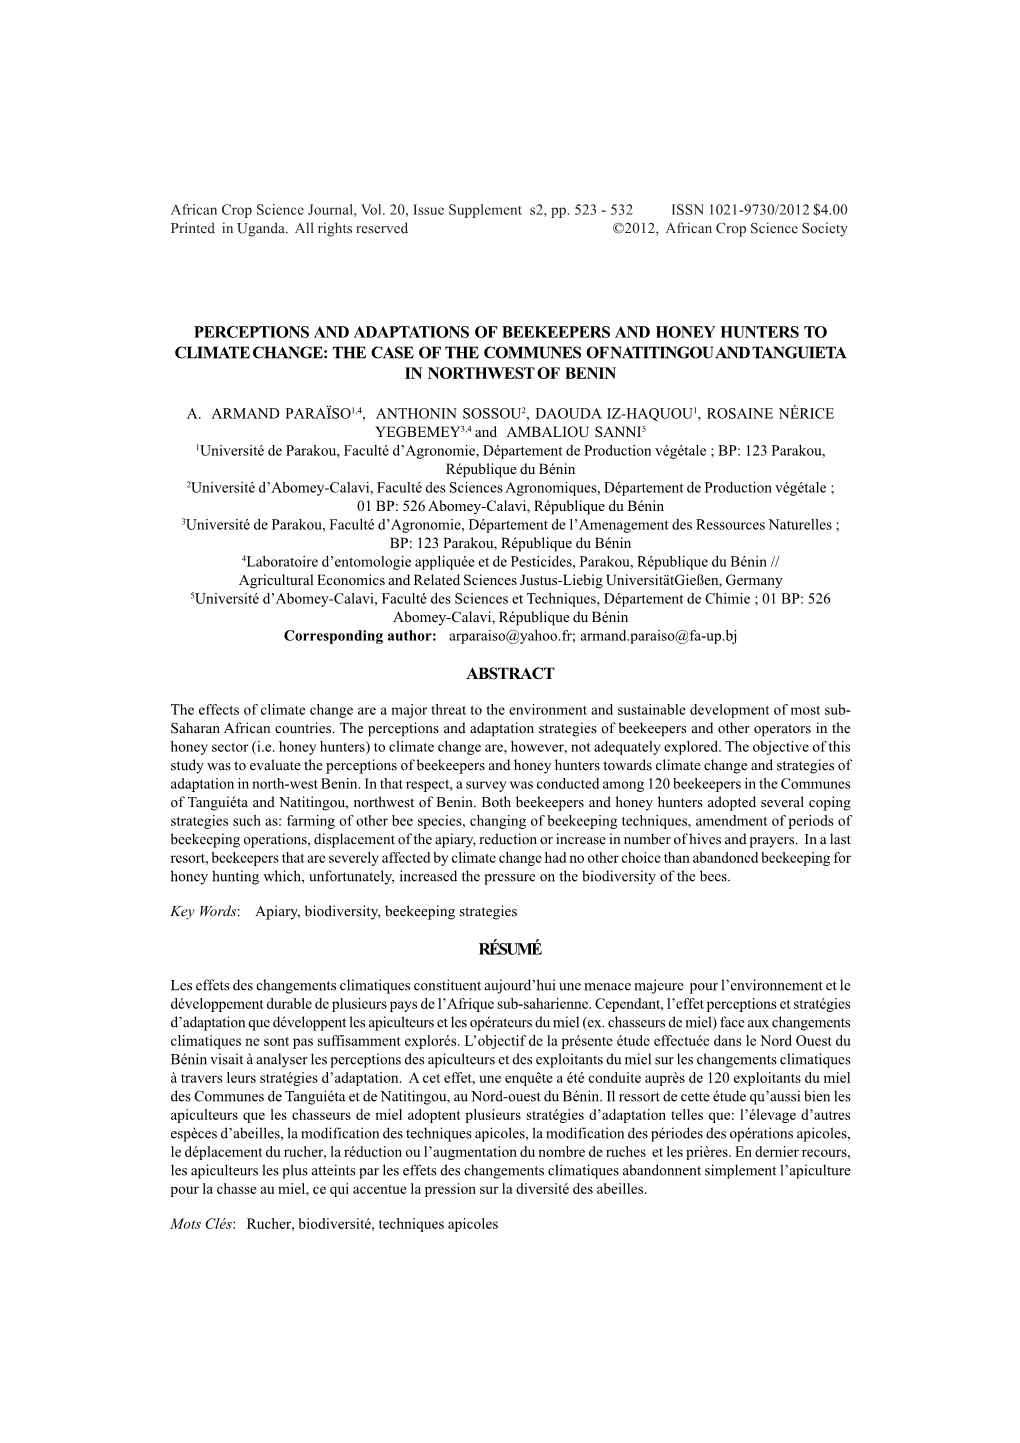 Perceptions and Adaptations of Beekeepers and Honey Hunters to Climate Change: the Case of the Communes of Natitingou and Tanguieta in Northwest of Benin